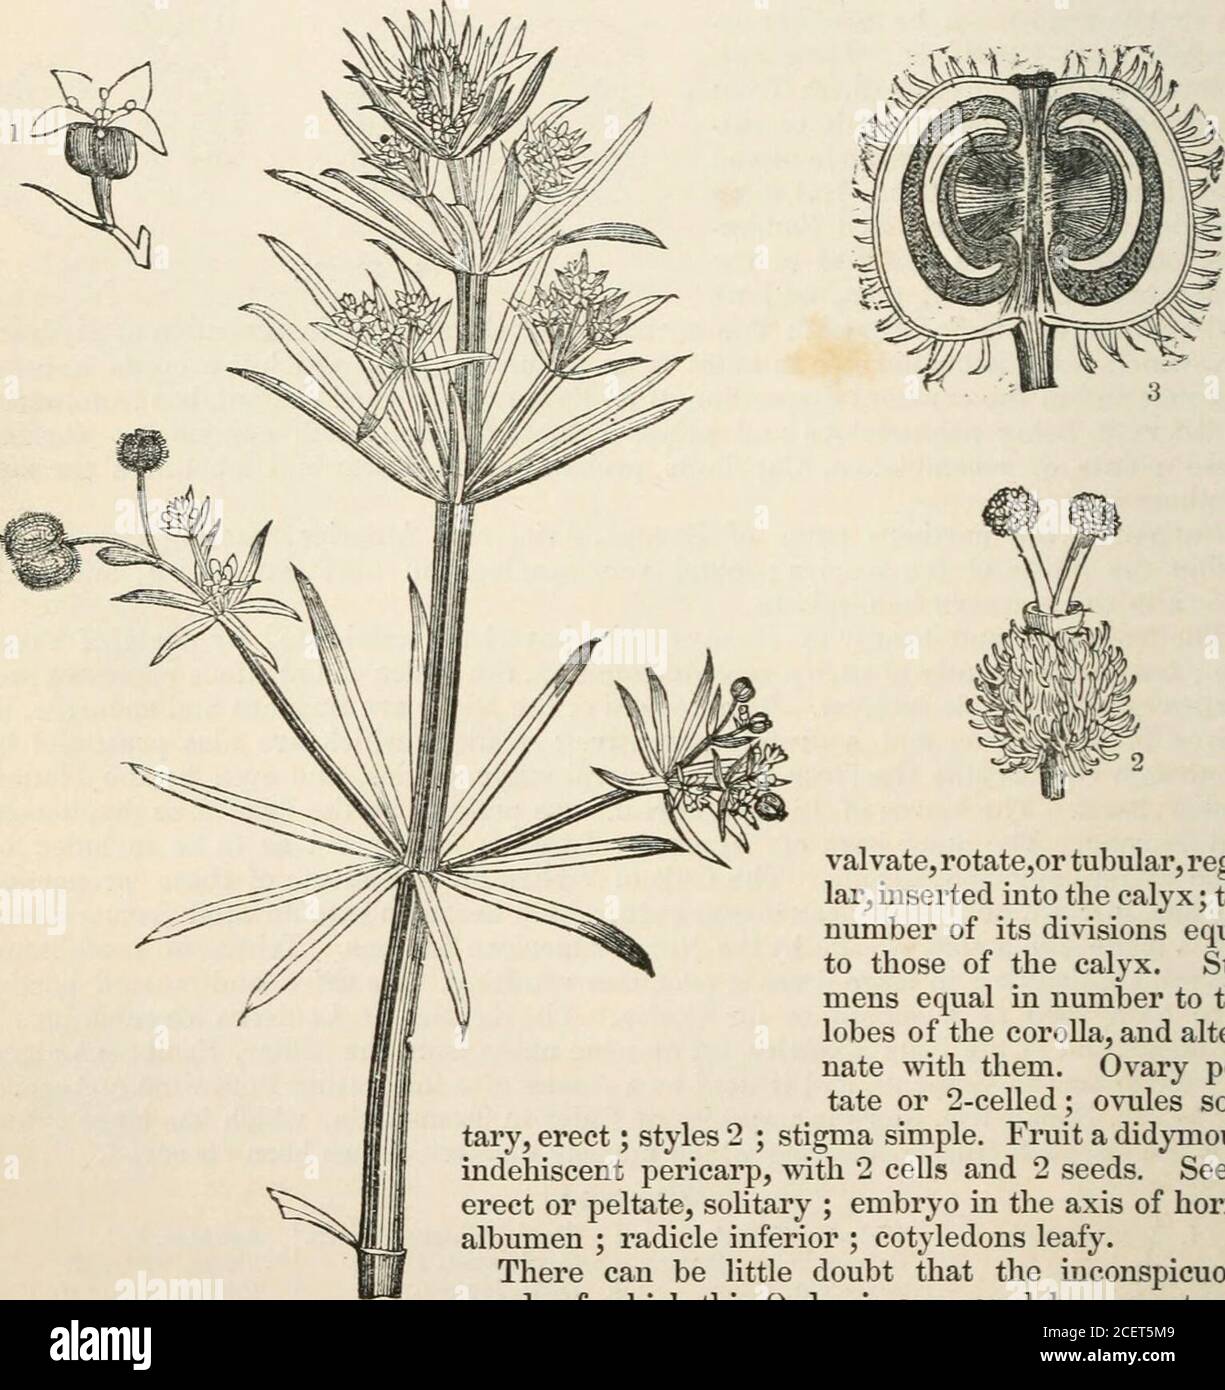 . The vegetable kingdom : or, The structure, classification, and uses of plants, illustrated upon the natural system. e.—Capuiioliace.e.—ColumelliacesB. Hijdran(jcacc(e. Fig. DVIII.—1. flower of Linnsea borealis; 2. the same cut open and showing the interior of theovary; 3. a cross section of the ovary ; 4. section of fruit of Lonicera tatarica; 5. half its seed. 768 GALIACEiE. [Epigynous Exogens. Order CCXCV. GALIACE^.—Stellates. Stellatse, Ray Synops. 223. (1690); R. Brown in Conqo, (1818),—Galiese, Turp, in Atlas du Noiiv. Diet,des Sc. (?)—Rubiaceae, § Stellatas, Cham, et Schlecht. in Linnc Stock Photo